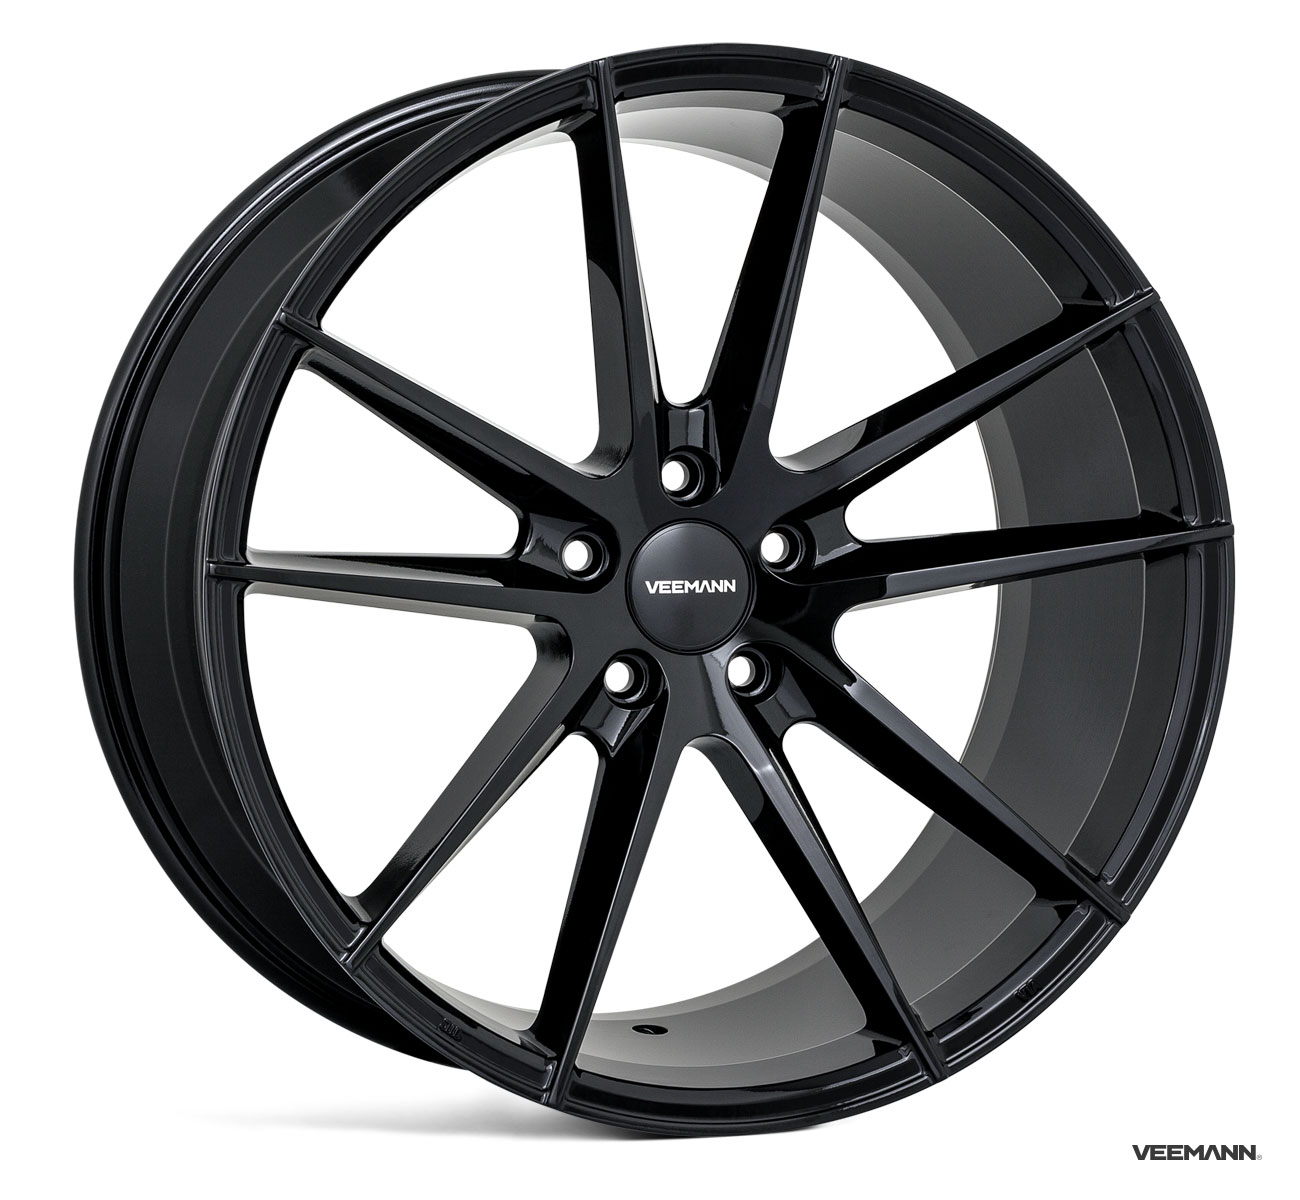 NEW 19" VEEMANN V-FS25 ALLOY WHEELS IN GLOSS BLACK WITH WIDER 9.5" REARS